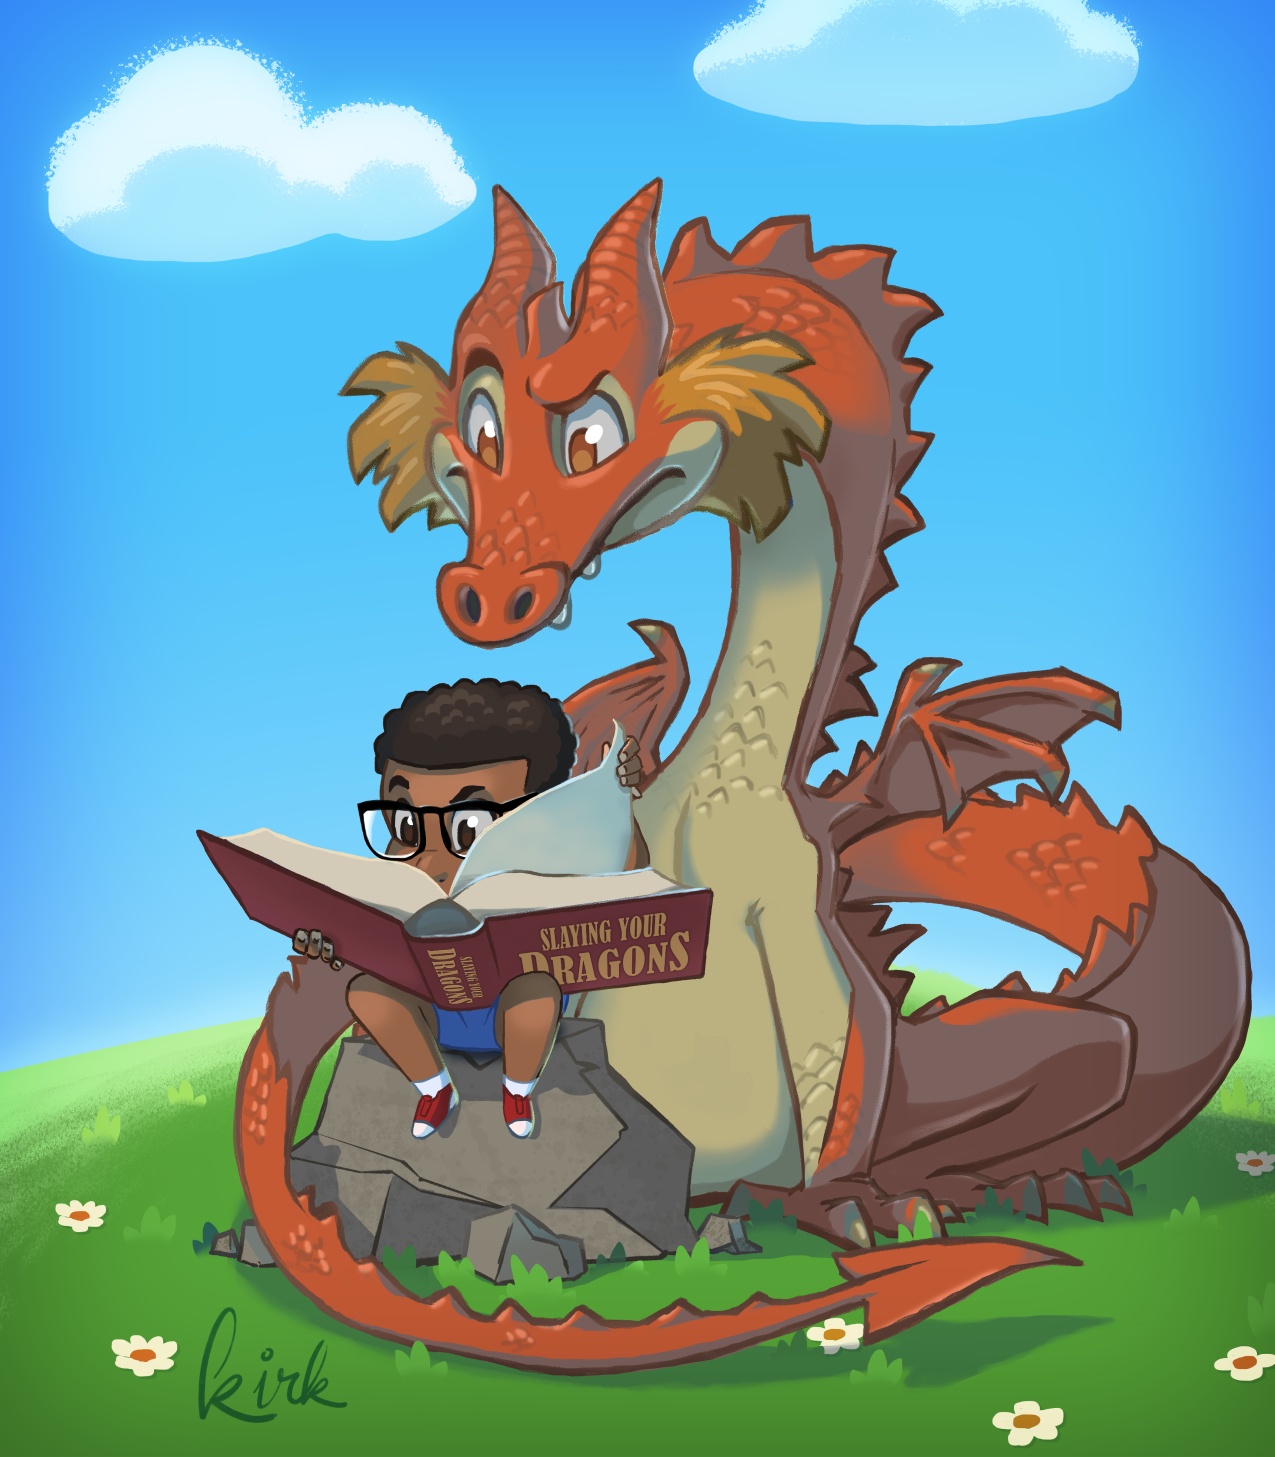 Professional Illustration for Children's Books, Games, and Education - Slaying Your Dragons